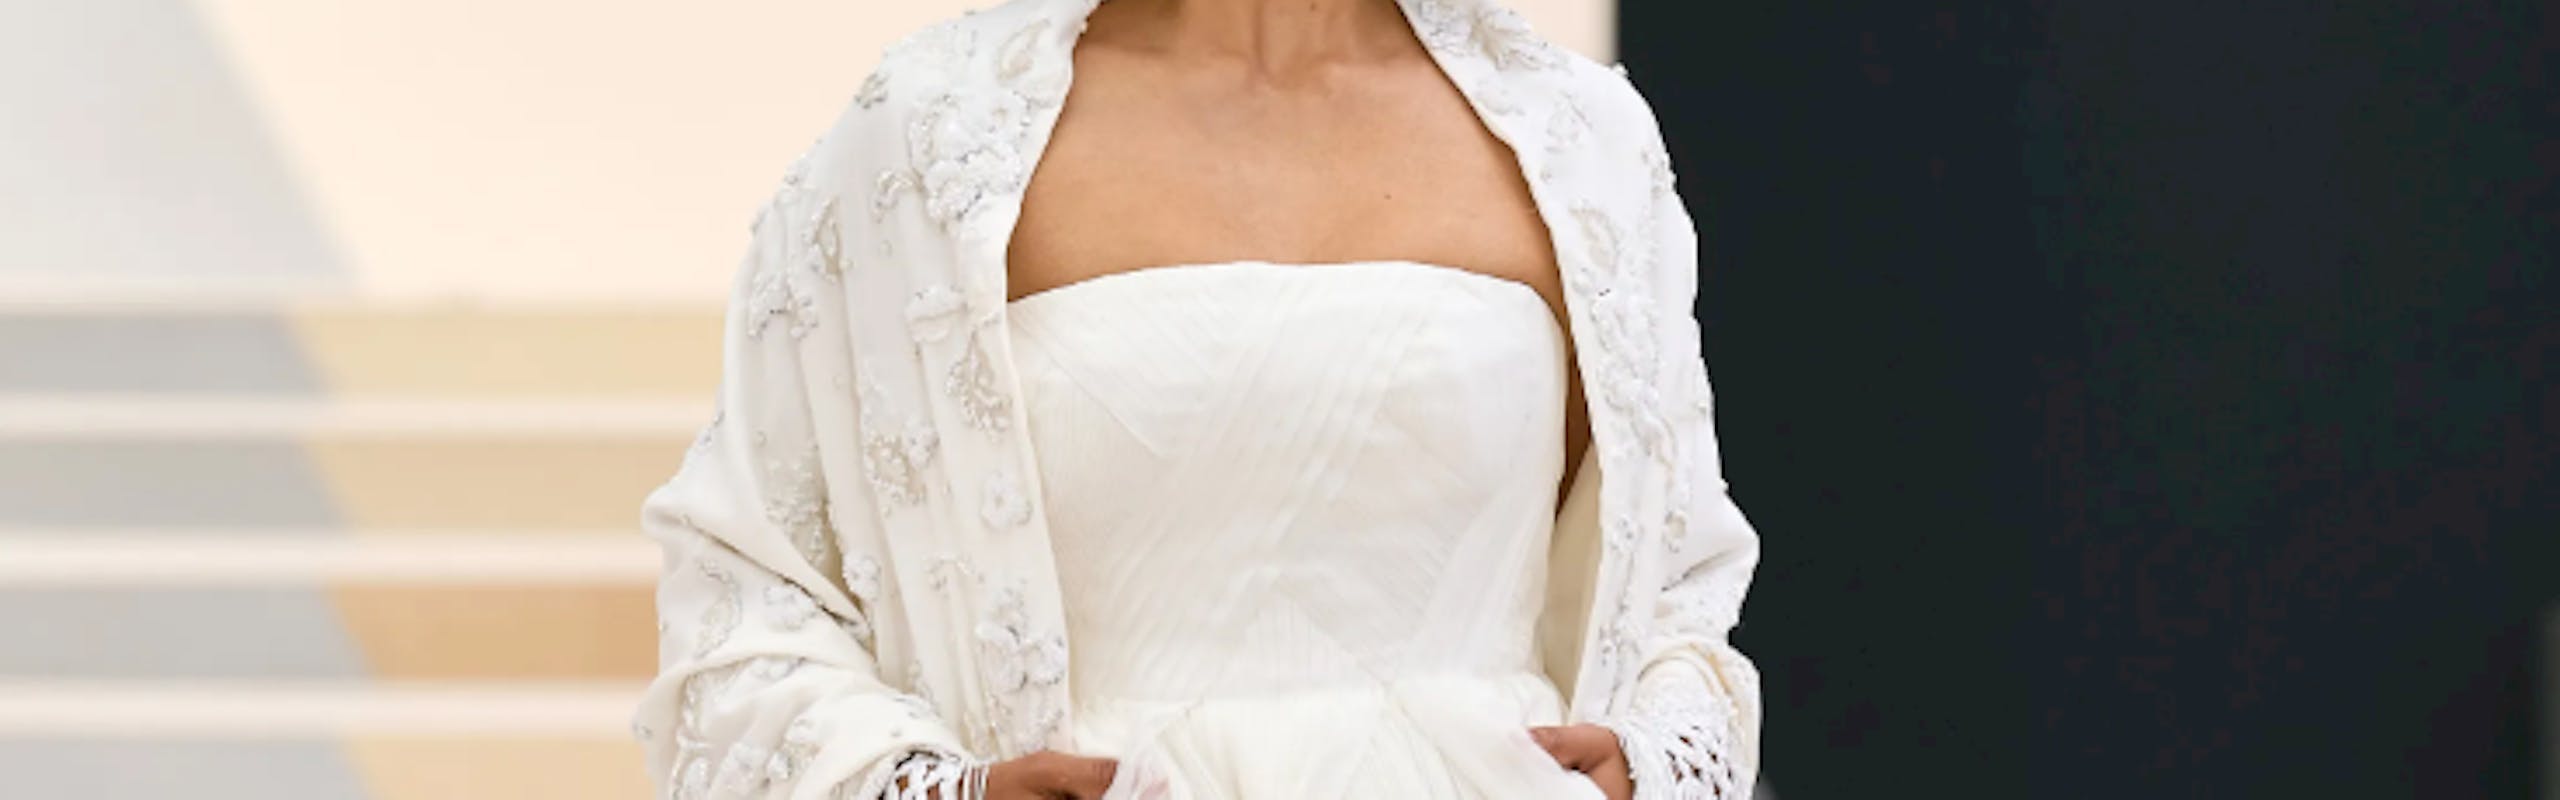 a model wearing a white bridal gown and a bow